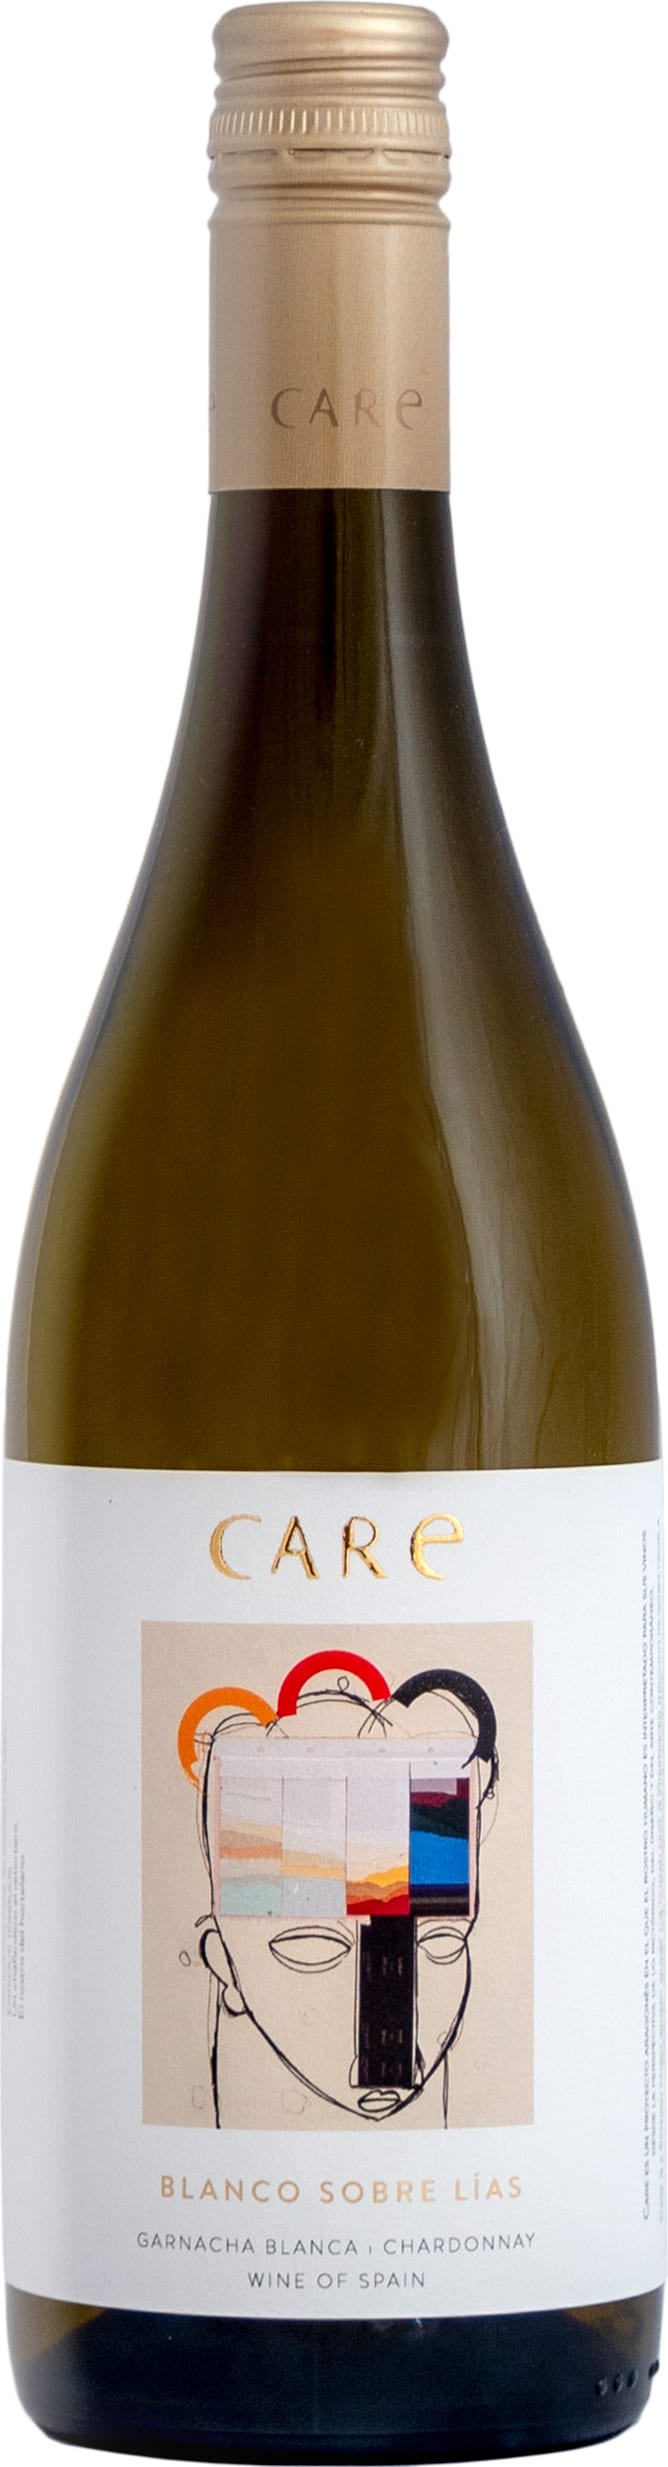 Care Blanco Sobre Lias 2022 75cl - Buy Care Wines from GREAT WINES DIRECT wine shop